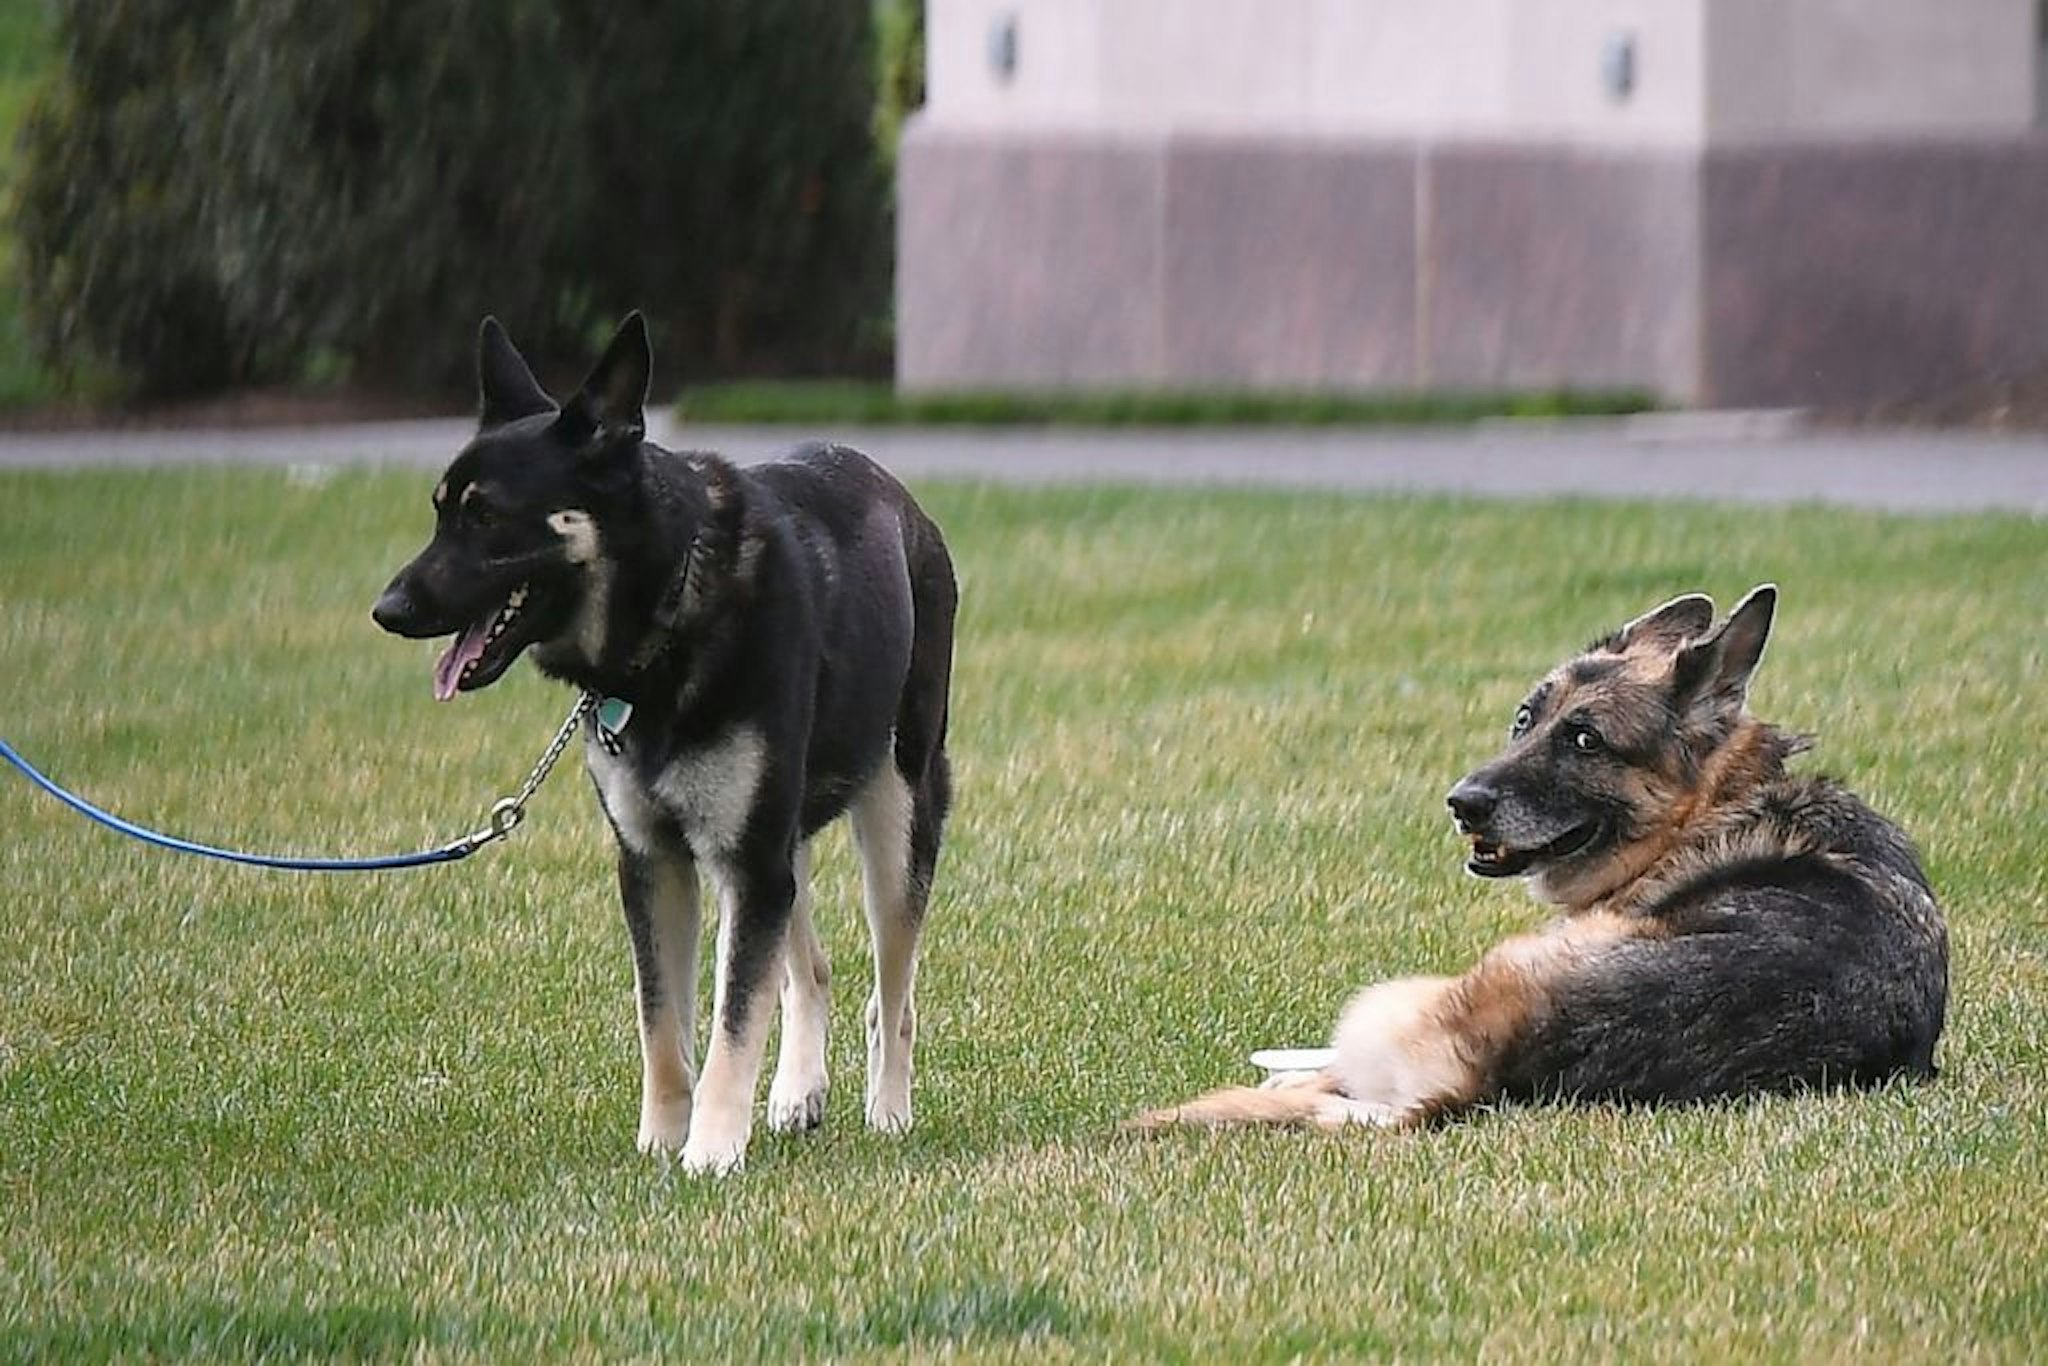 The Bidens dogs Champ(R) and Major are seen on the South Lawn of the White House in Washington, DC, on March 31, 2021